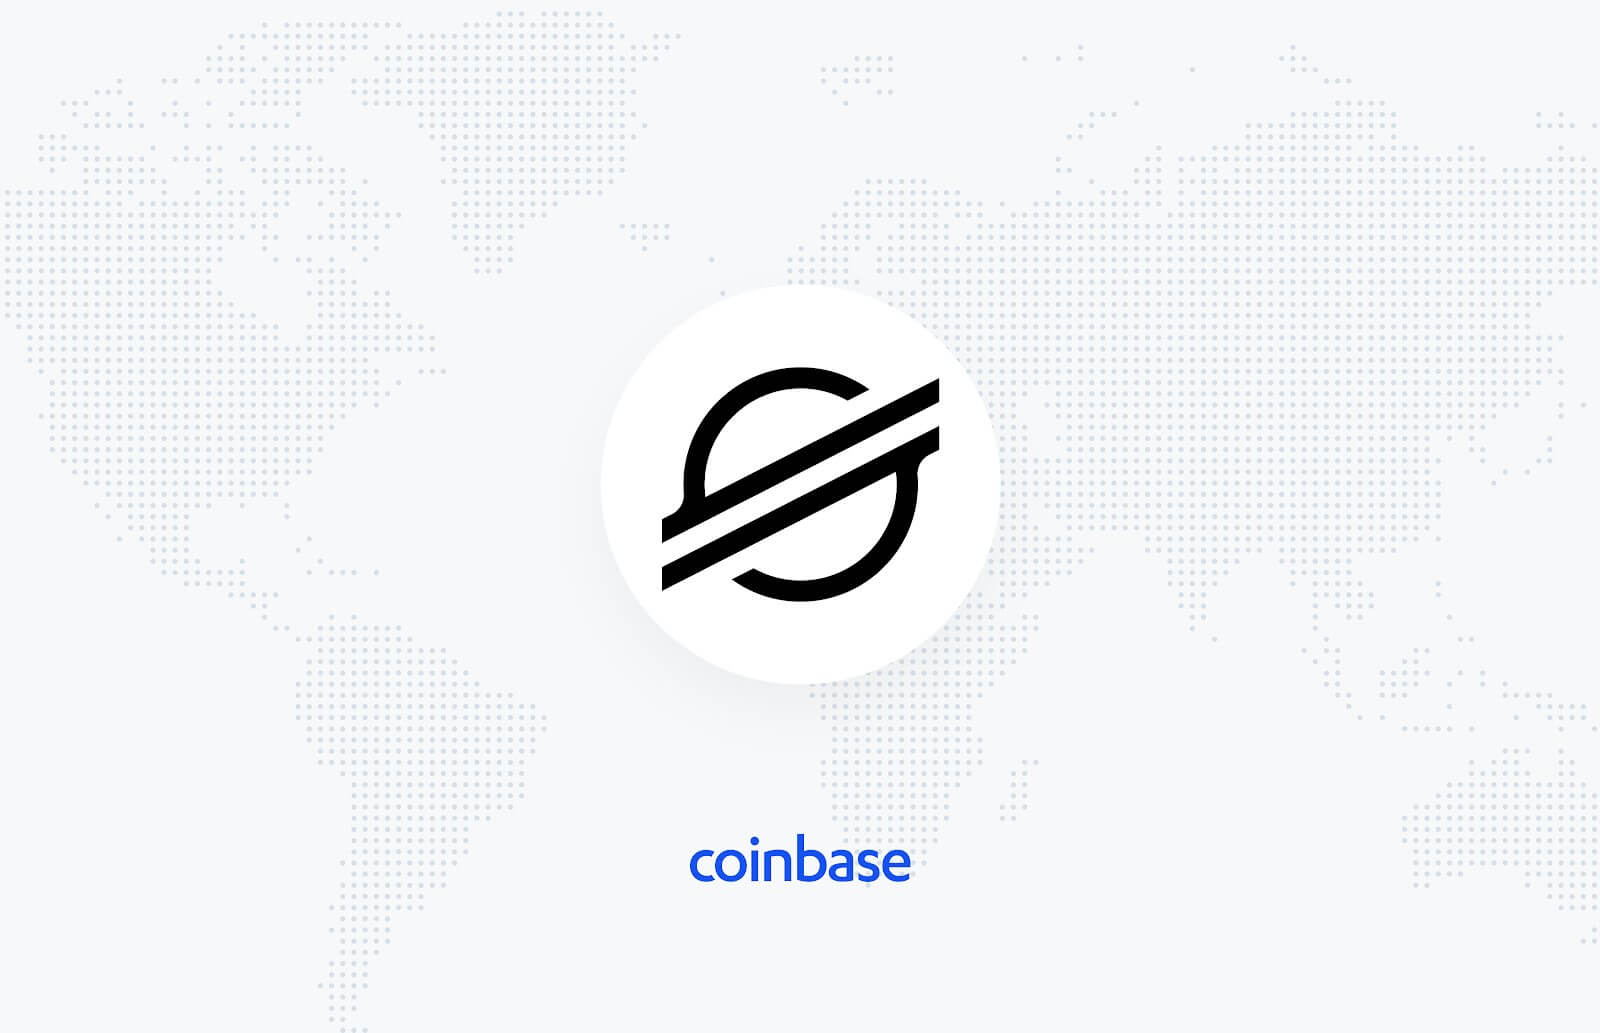 Coinbase Pro Adds Support for Stellar Lumens (XLM)